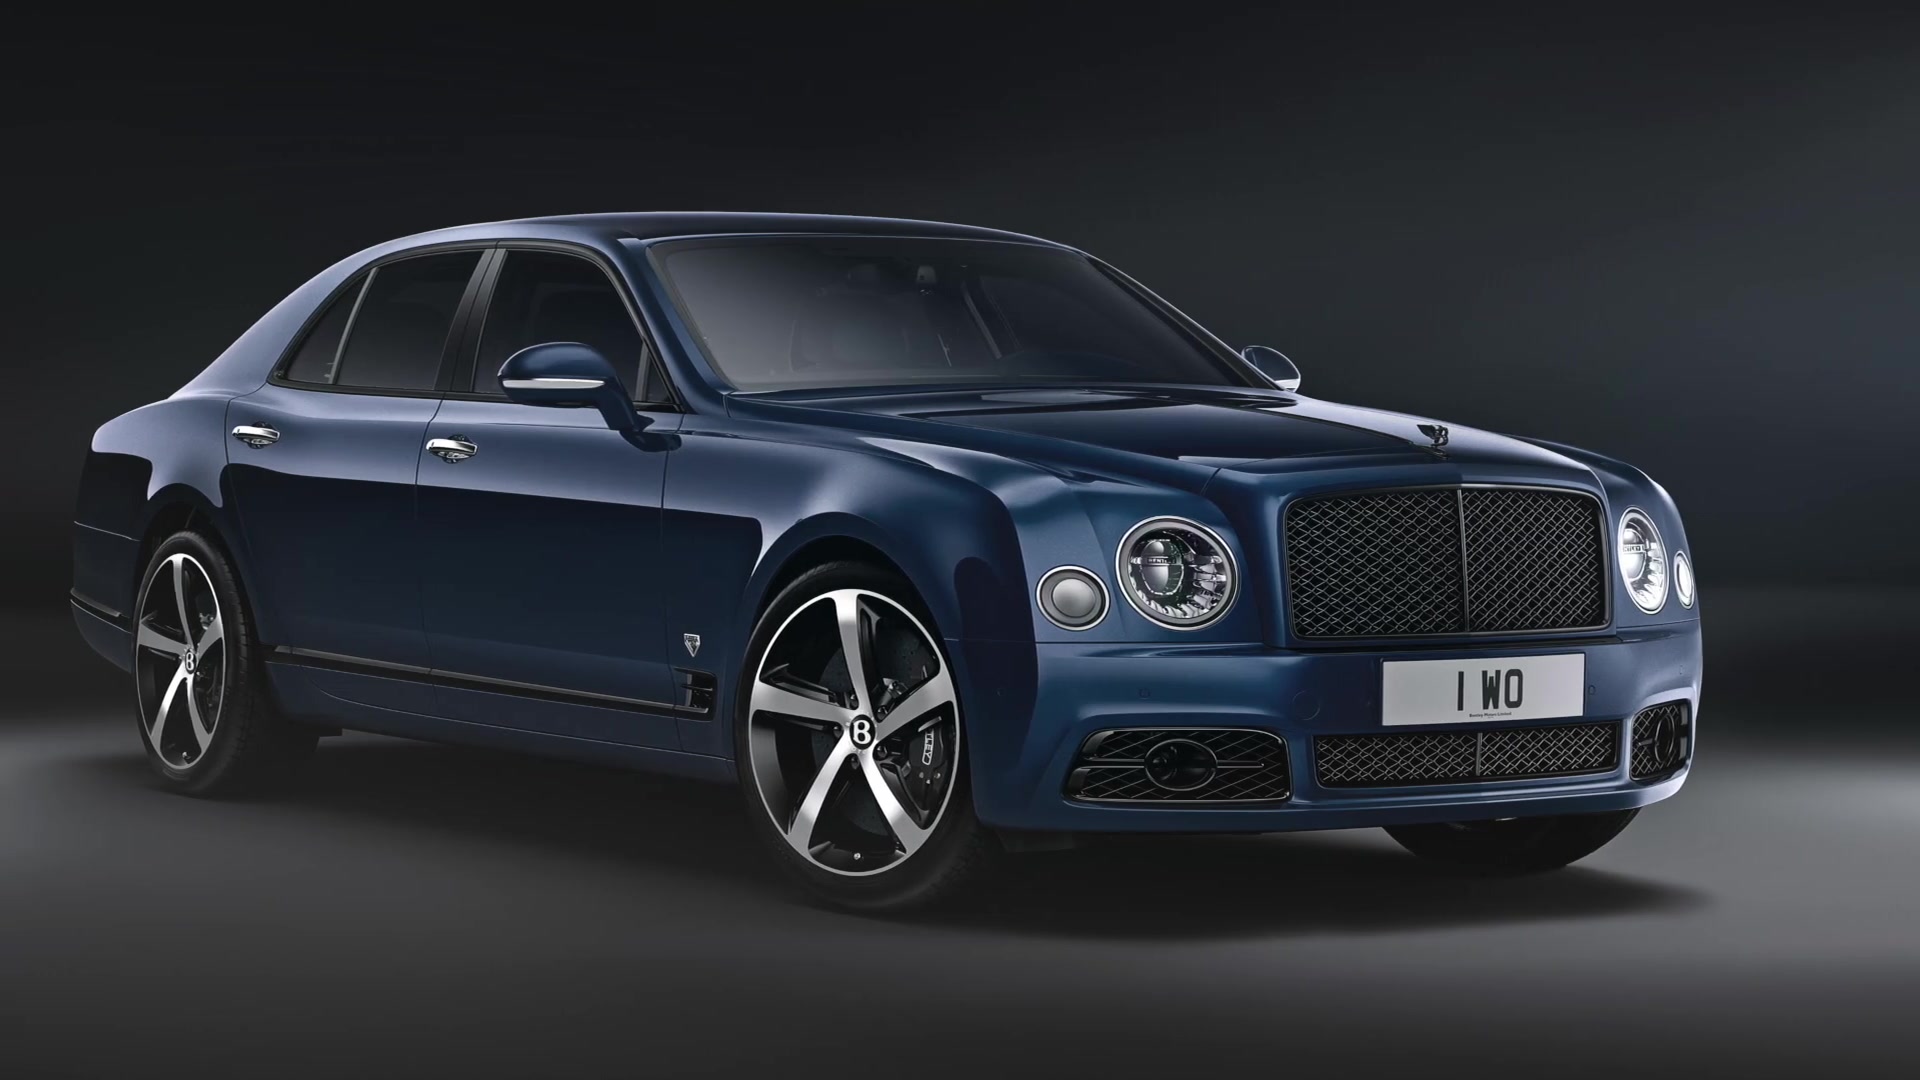 Bentley celebrates iconic Mulsanne and legendary engine with unique final ‘6.75 Edition’